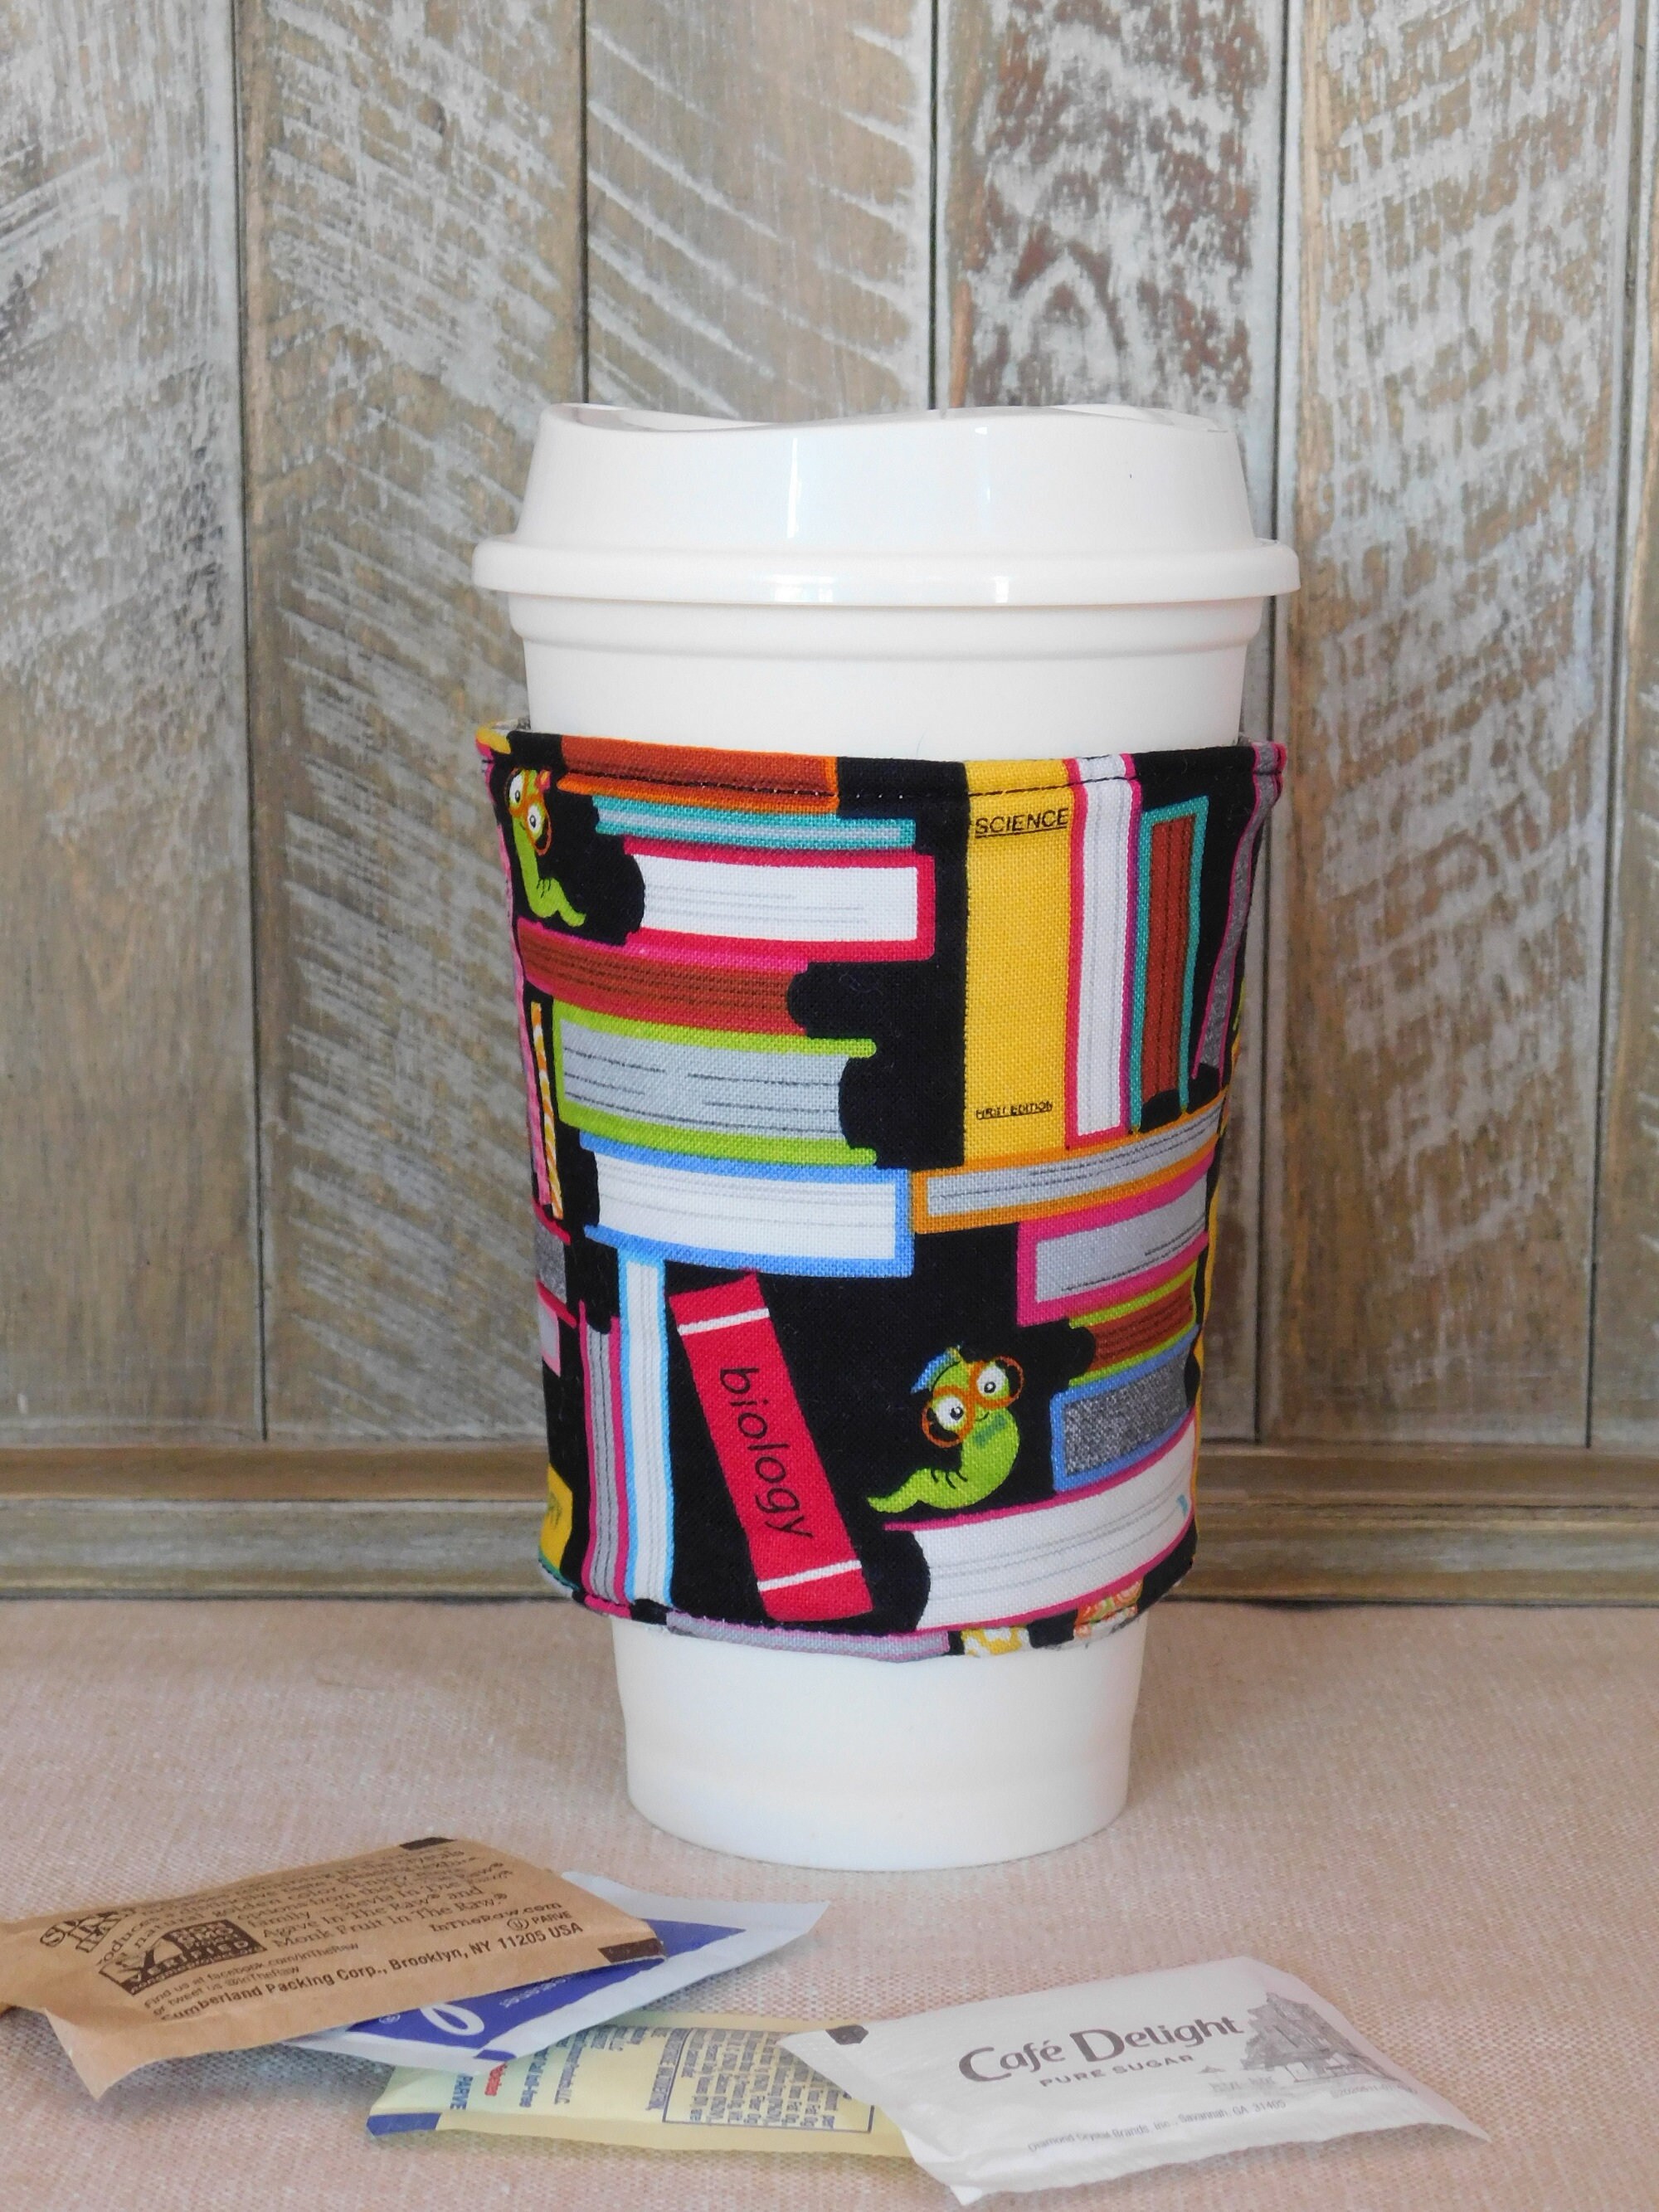 Louis Vuitton Coffee Sleeve Cozy With Authentic Canvas and 